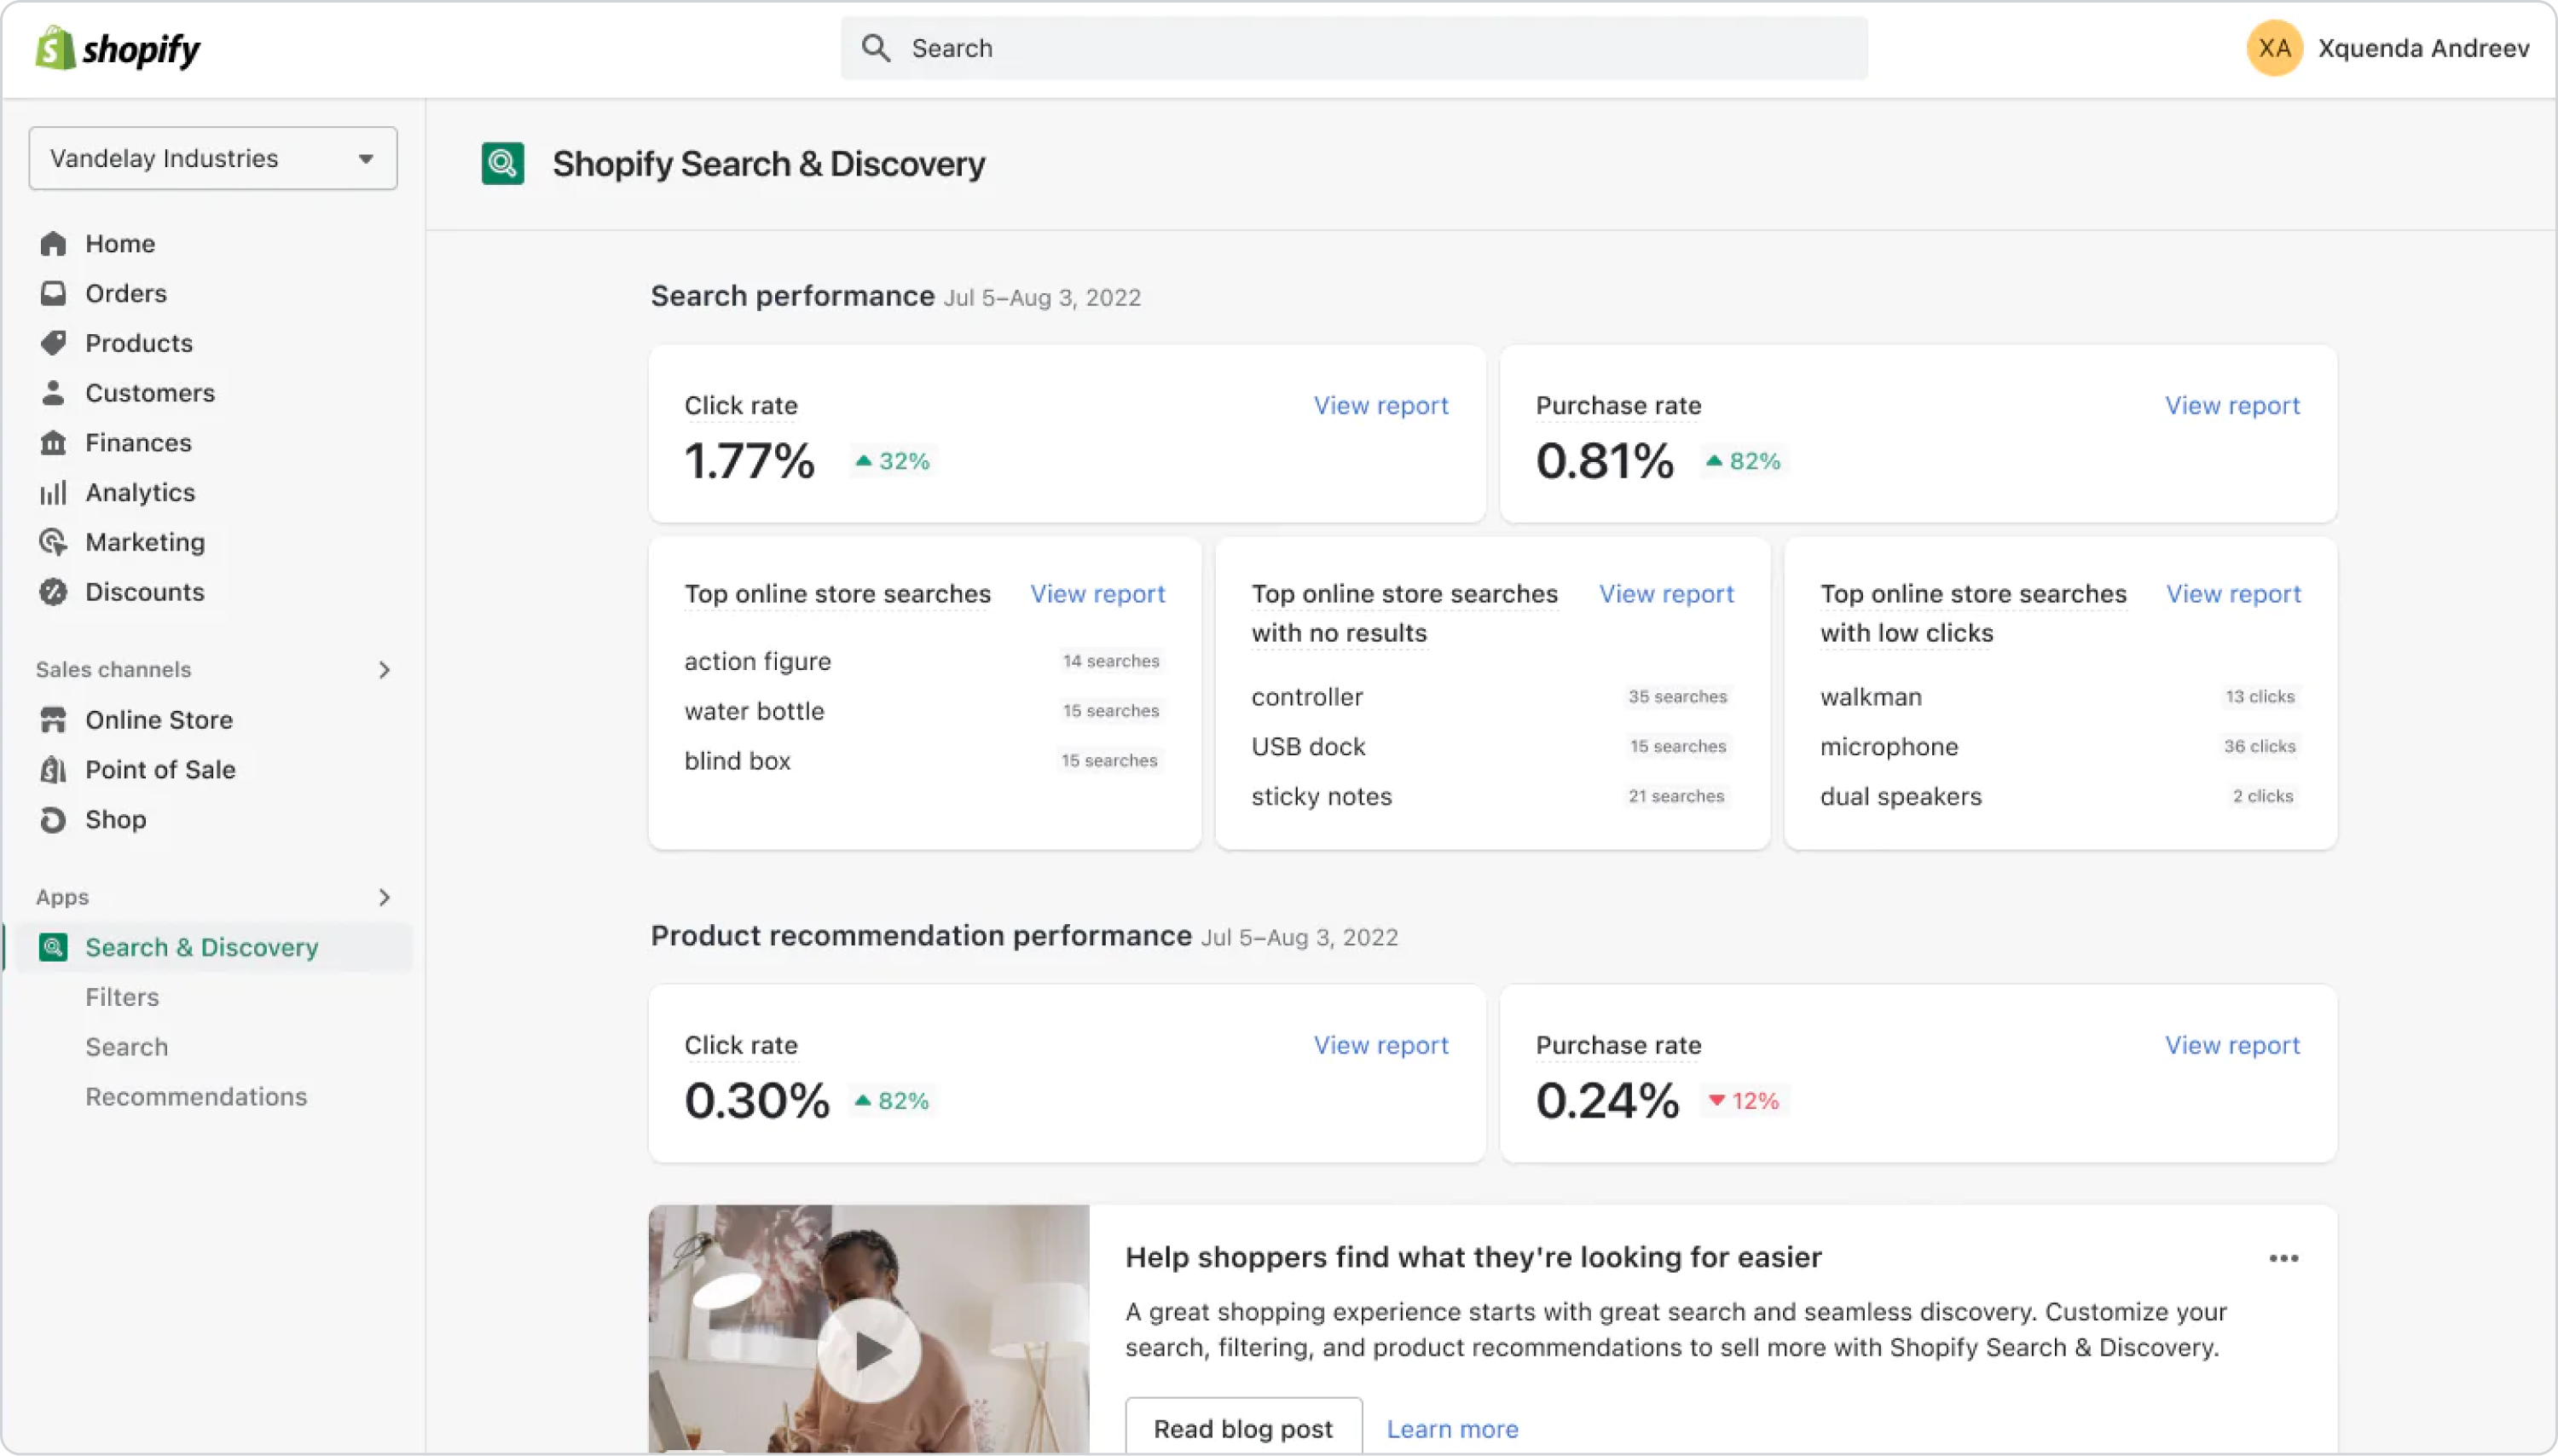 Screenshot of key metrics on the home page of the Shopify Search & Discovery app.